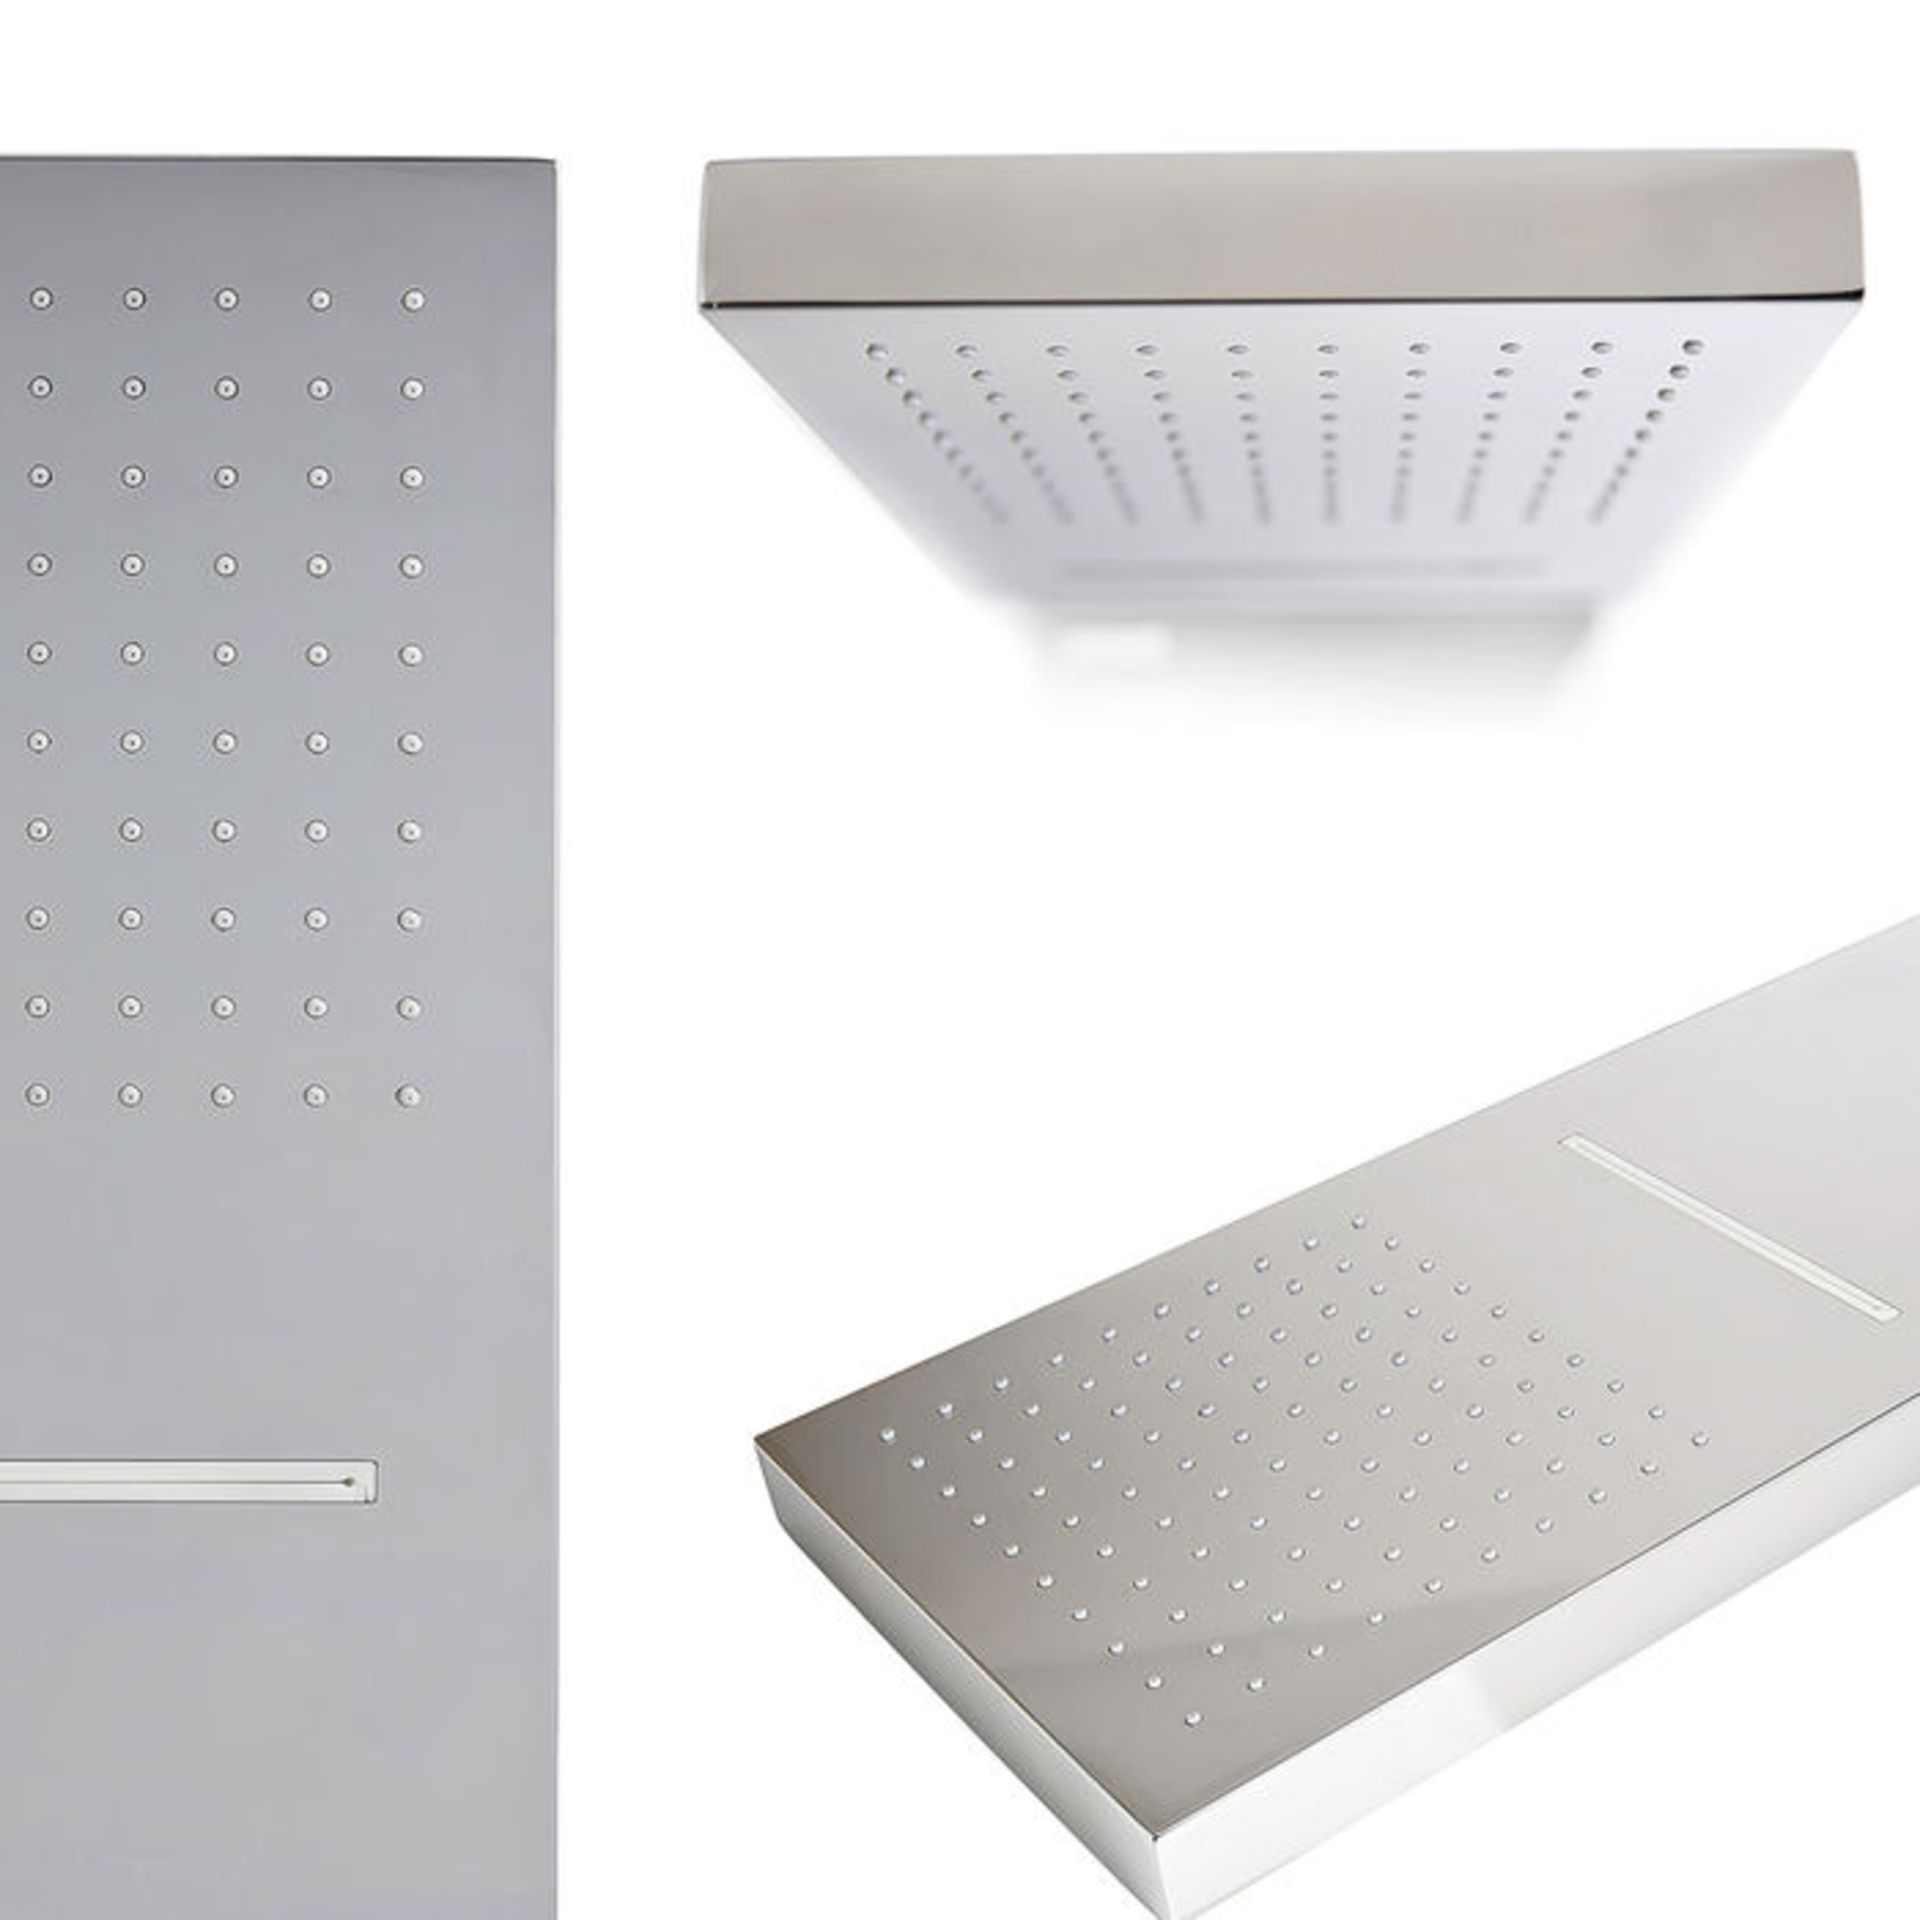 (TA43) Stainless Steel 230x500mm Waterfall Shower Head. RRP £374.99. Dual function waterfall and - Image 6 of 6